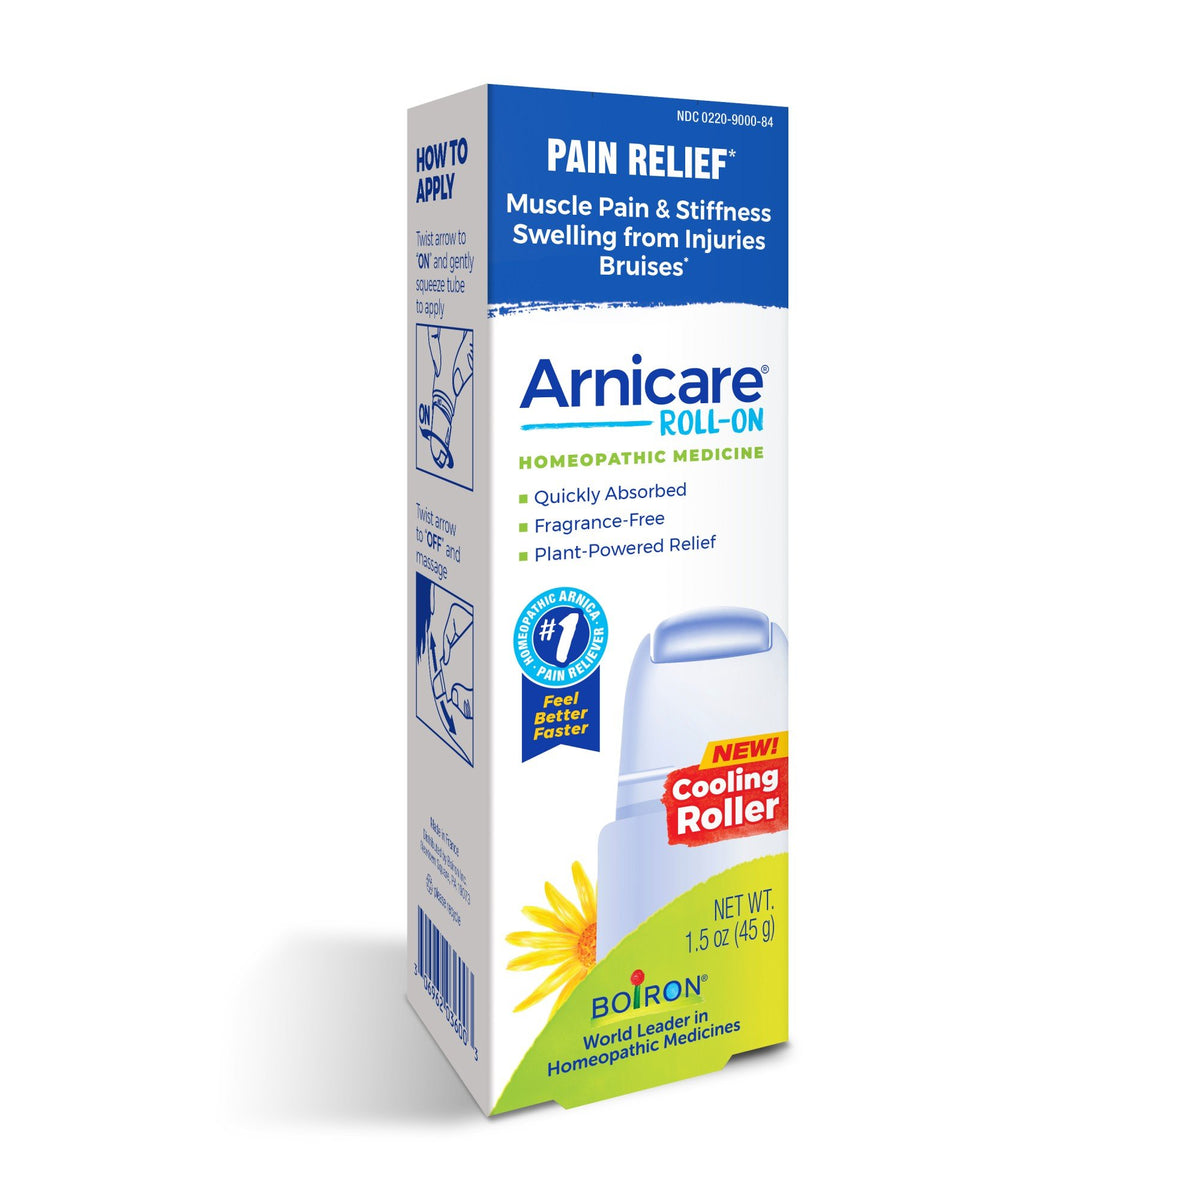 Boiron Arnicare Roll-On Single Pack (Metal Ball) 1.5 oz Roll-on